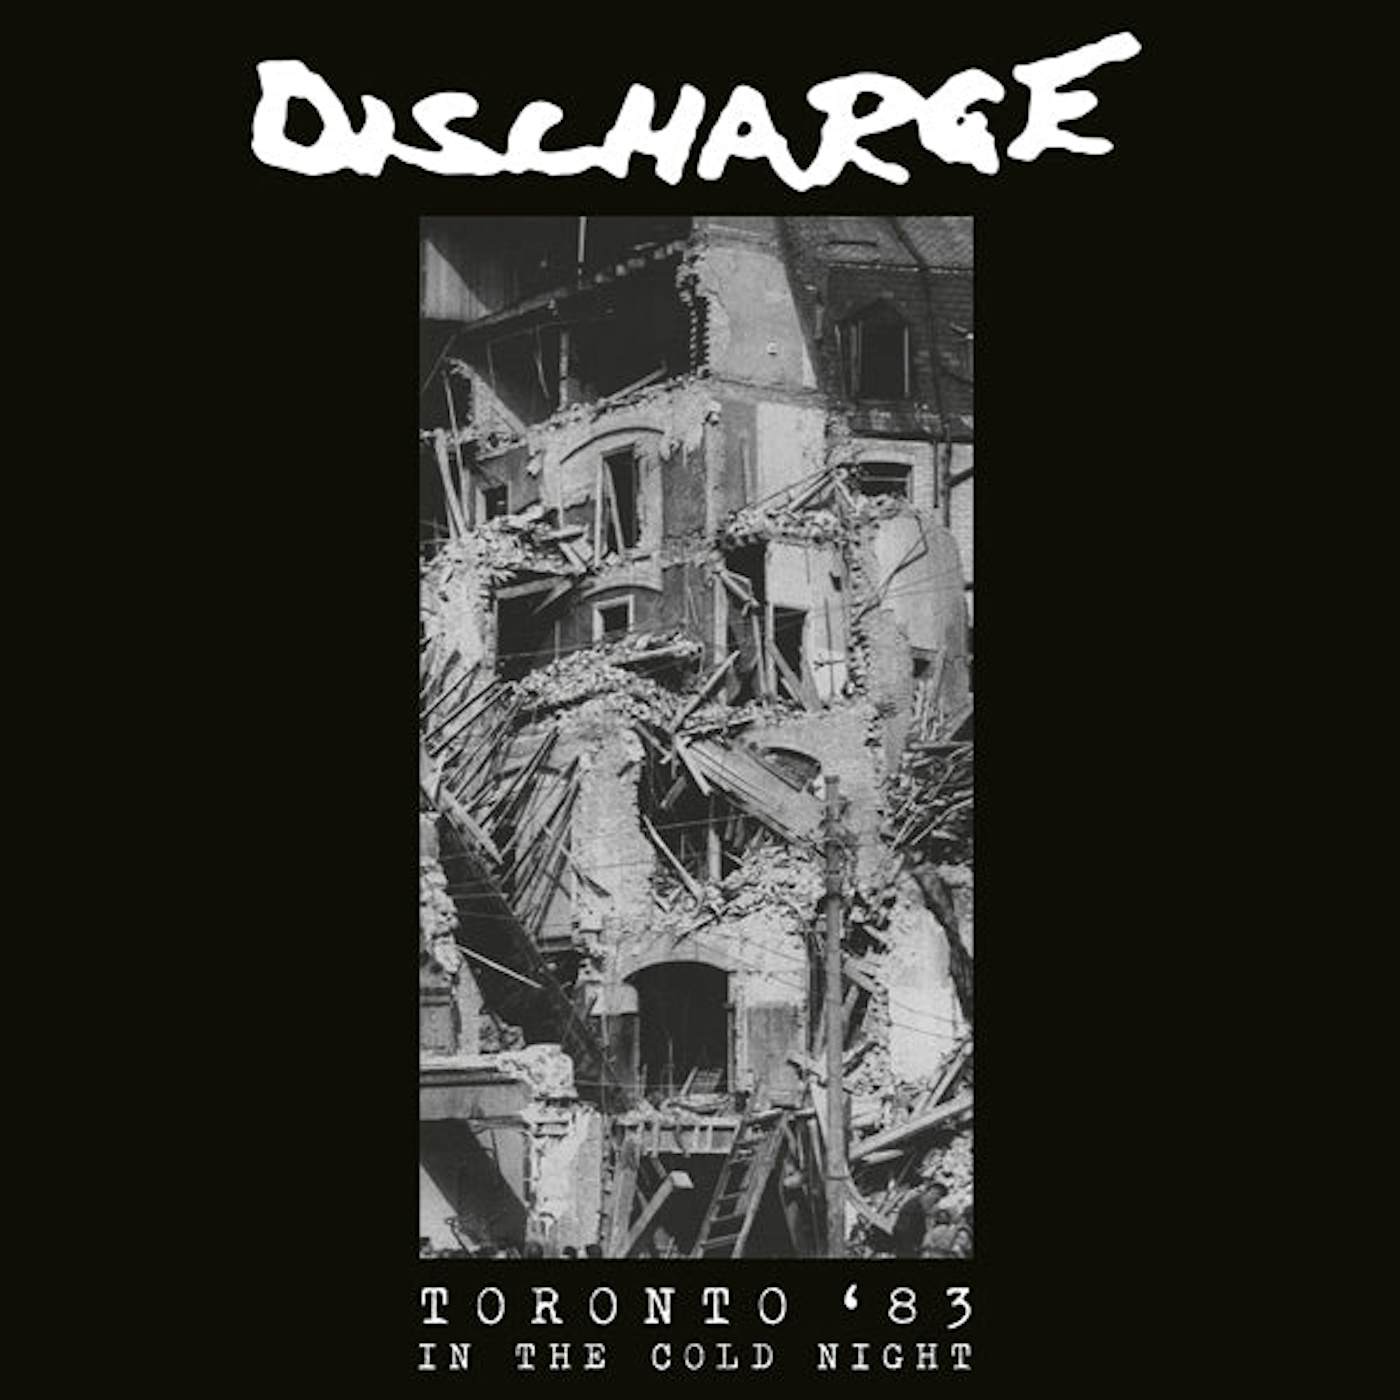 Discharge LP - In The Cold Night - Toronto 1983 (White Vinyl)